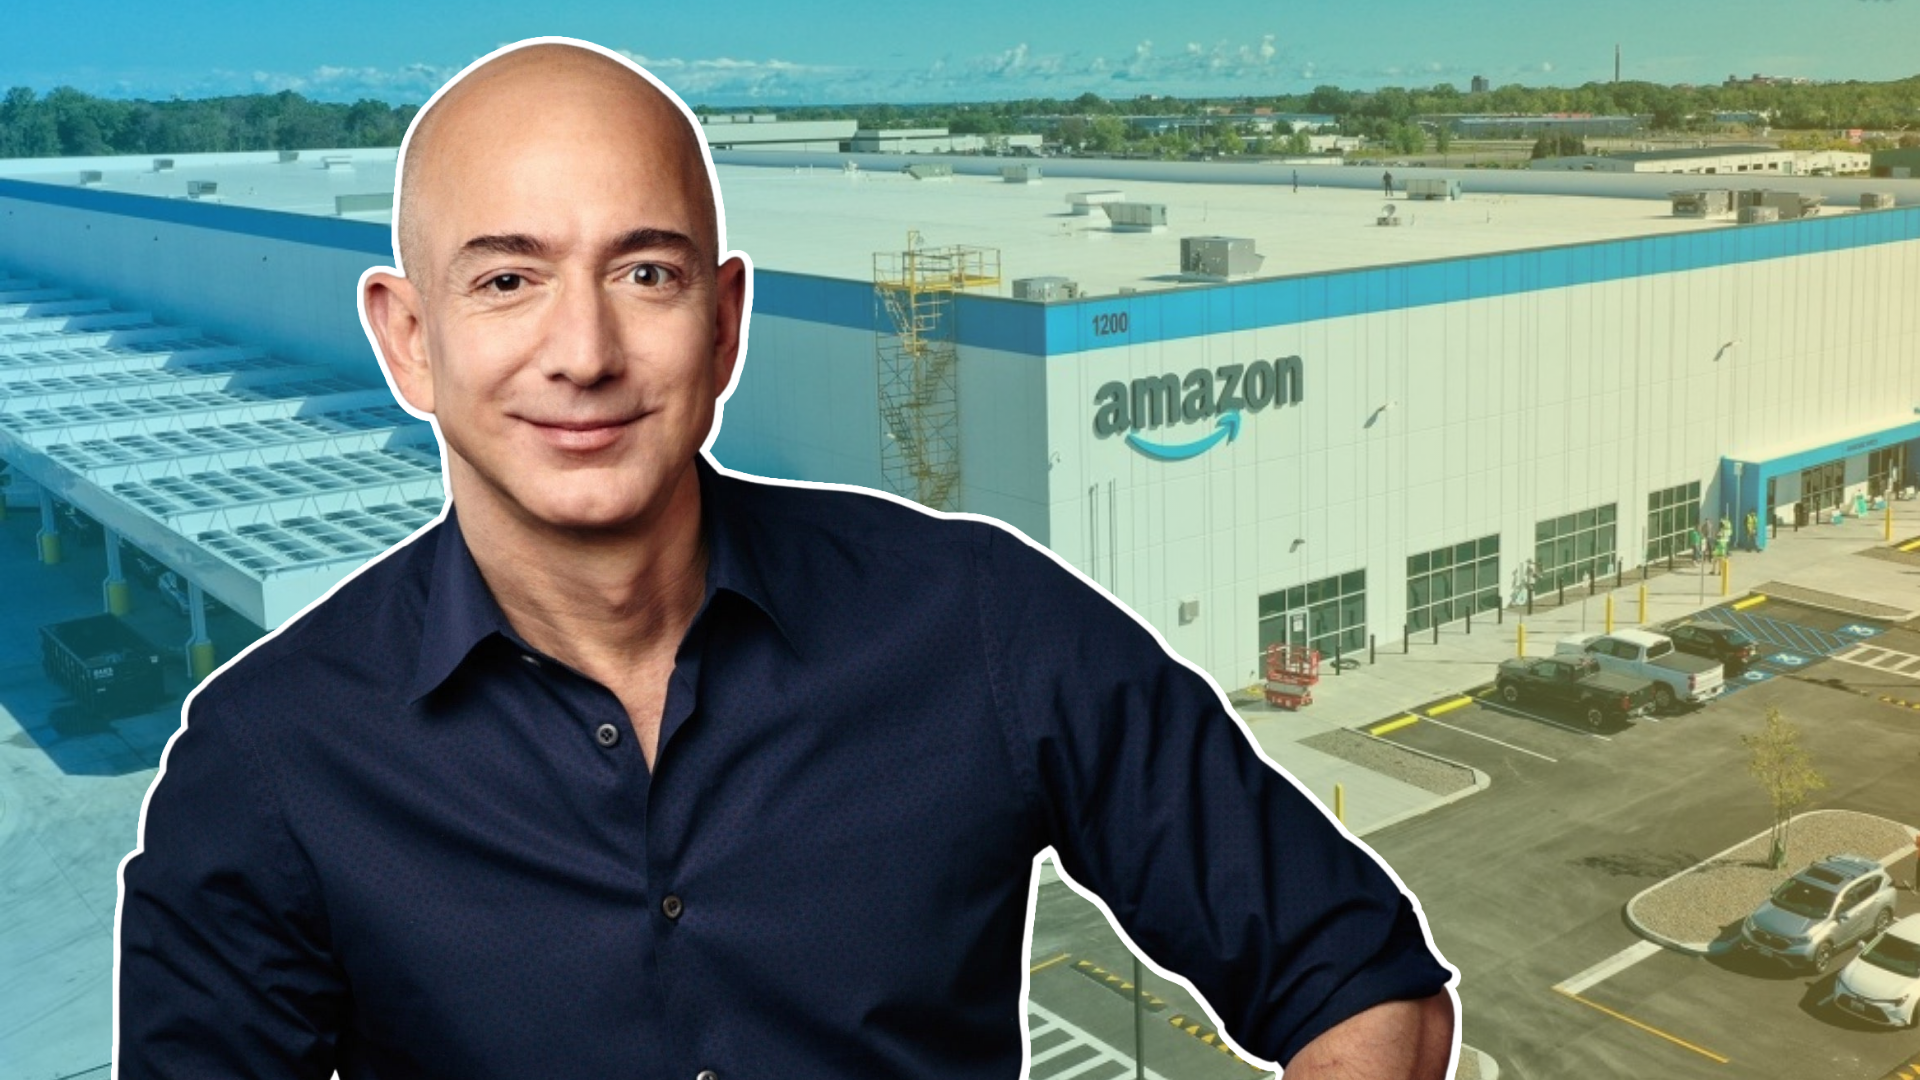 Find out why Amazon founder Jeff Bezos believes that the very best entrepreneurs are "missionaries instead of mercenaries."